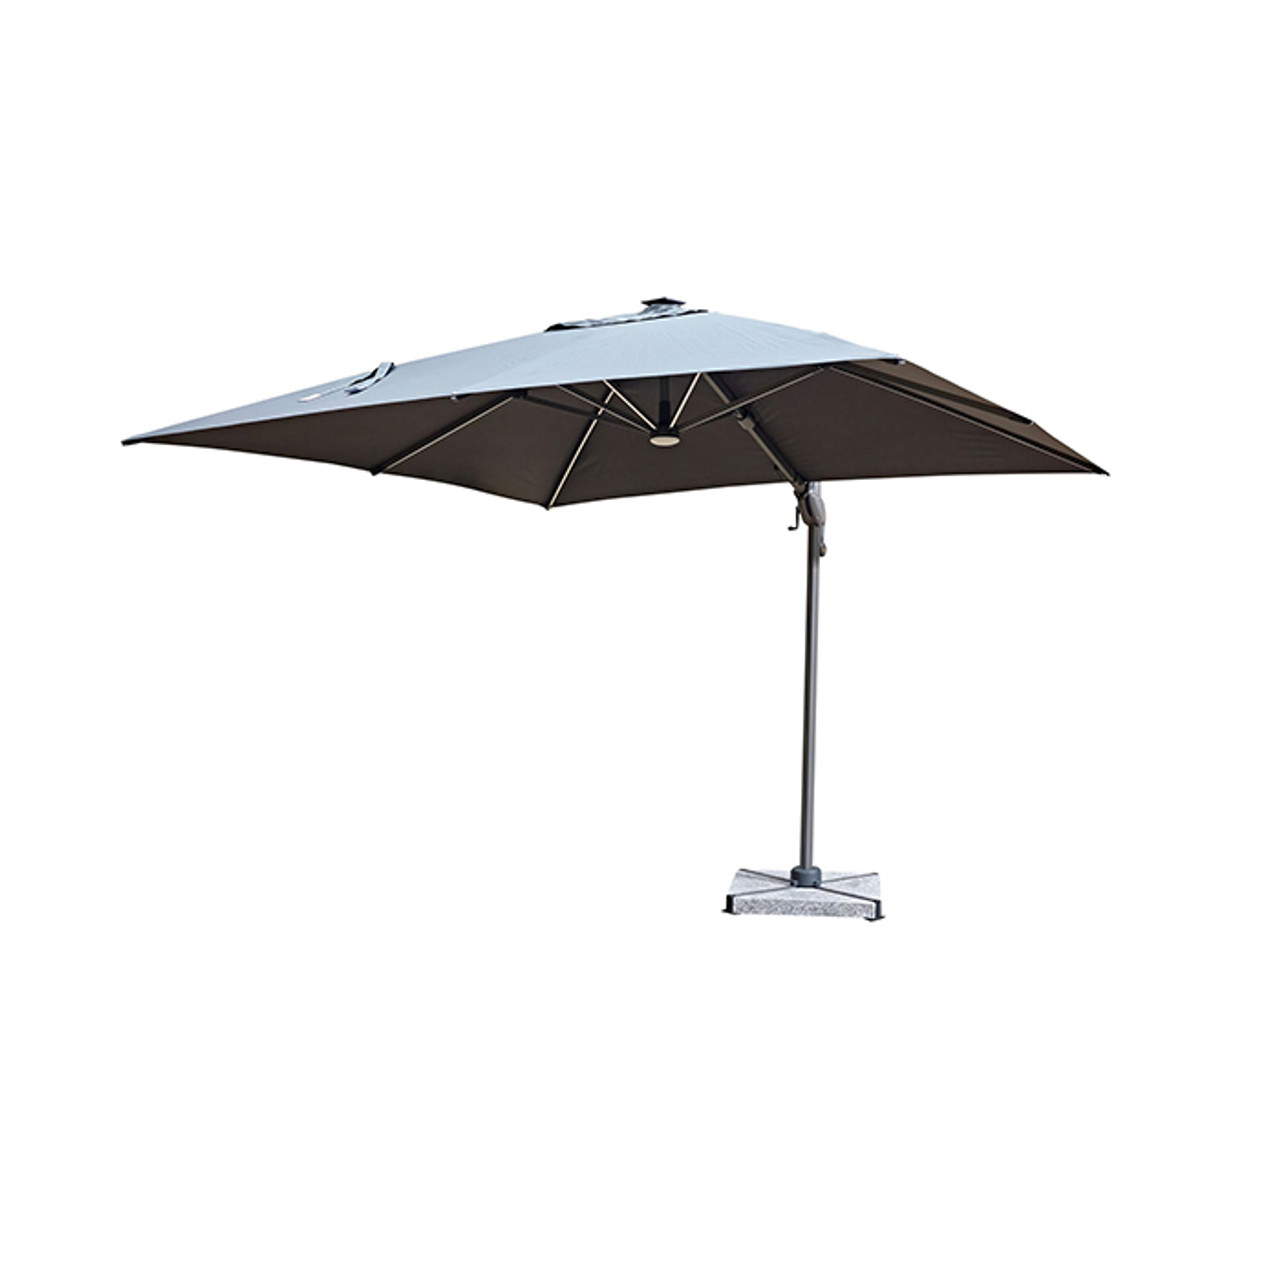 Truro 3.0 x 3.0m Grey Square Cantilever Parasol with LED Light & Cover